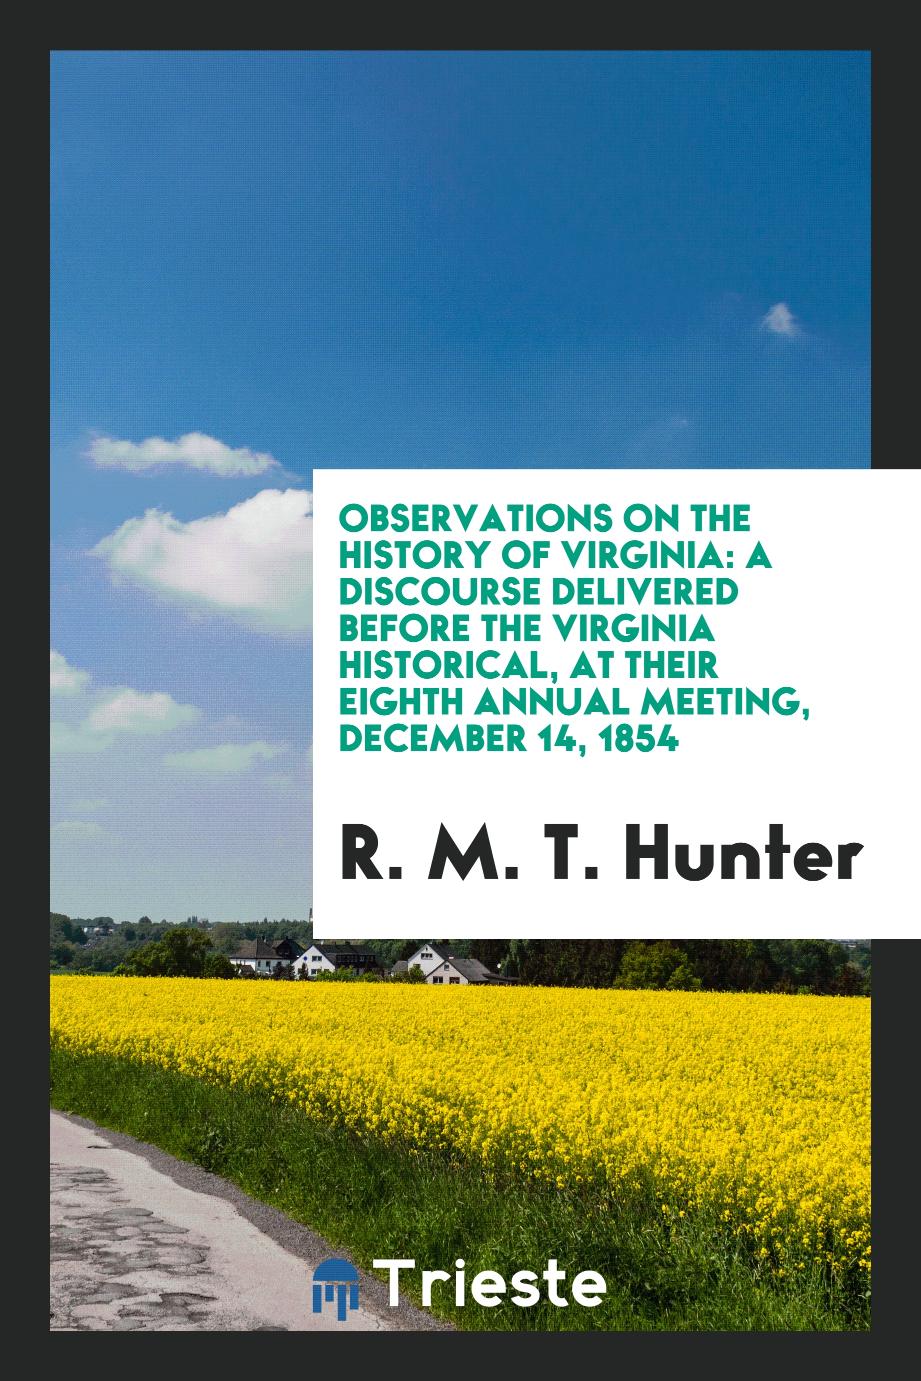 Observations on the History of Virginia: A Discourse Delivered Before the Virginia Historical, at their eighth annual meeting, December 14, 1854